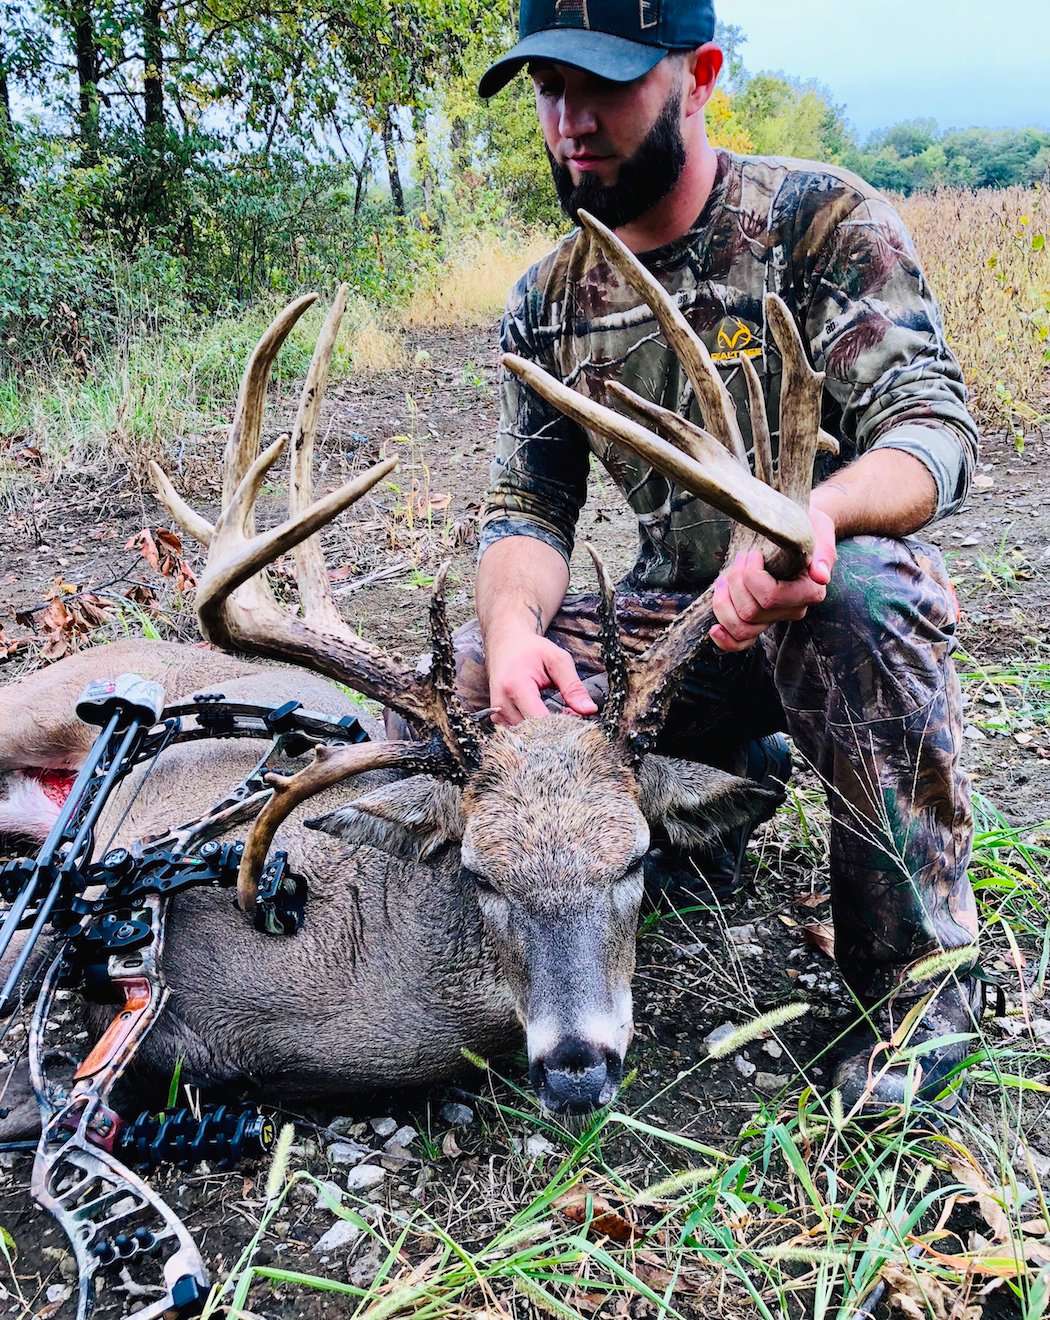 Creston Wolford admires the giant non-typical buck he arrowed in Missouri between thunderstorms. (Photo courtesy of Creston Wolford)